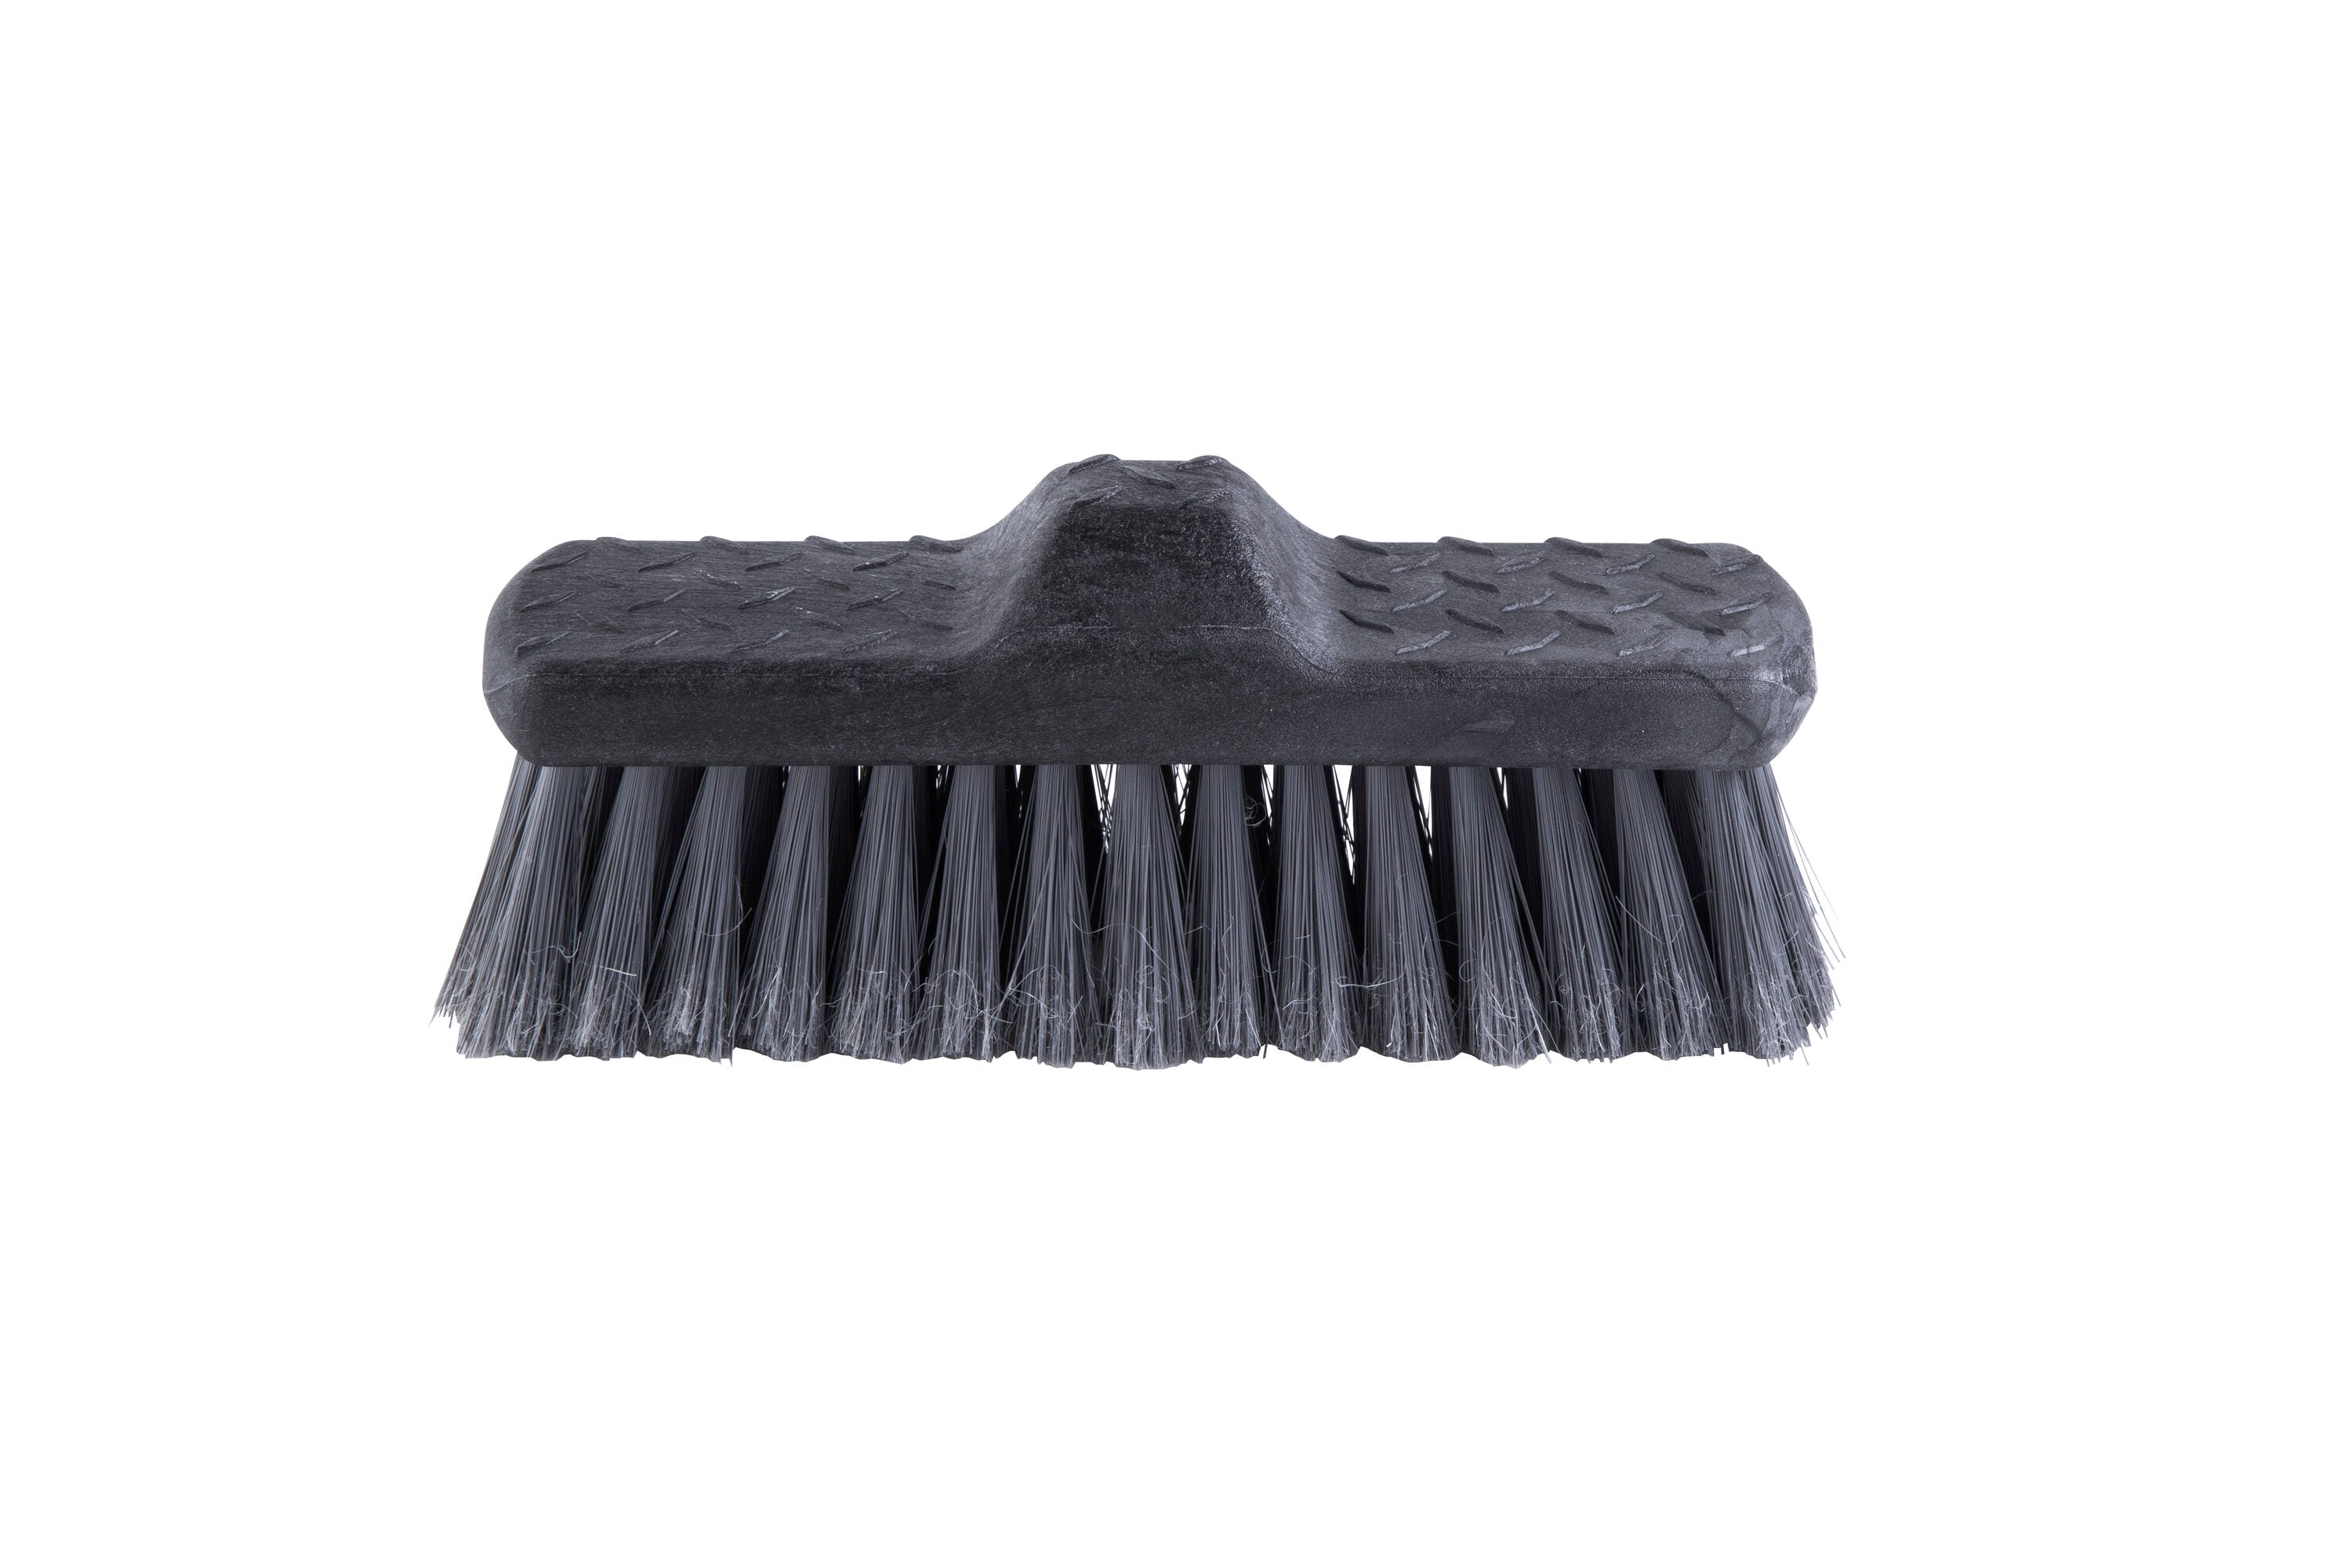 Automotive Cleaning Brushes